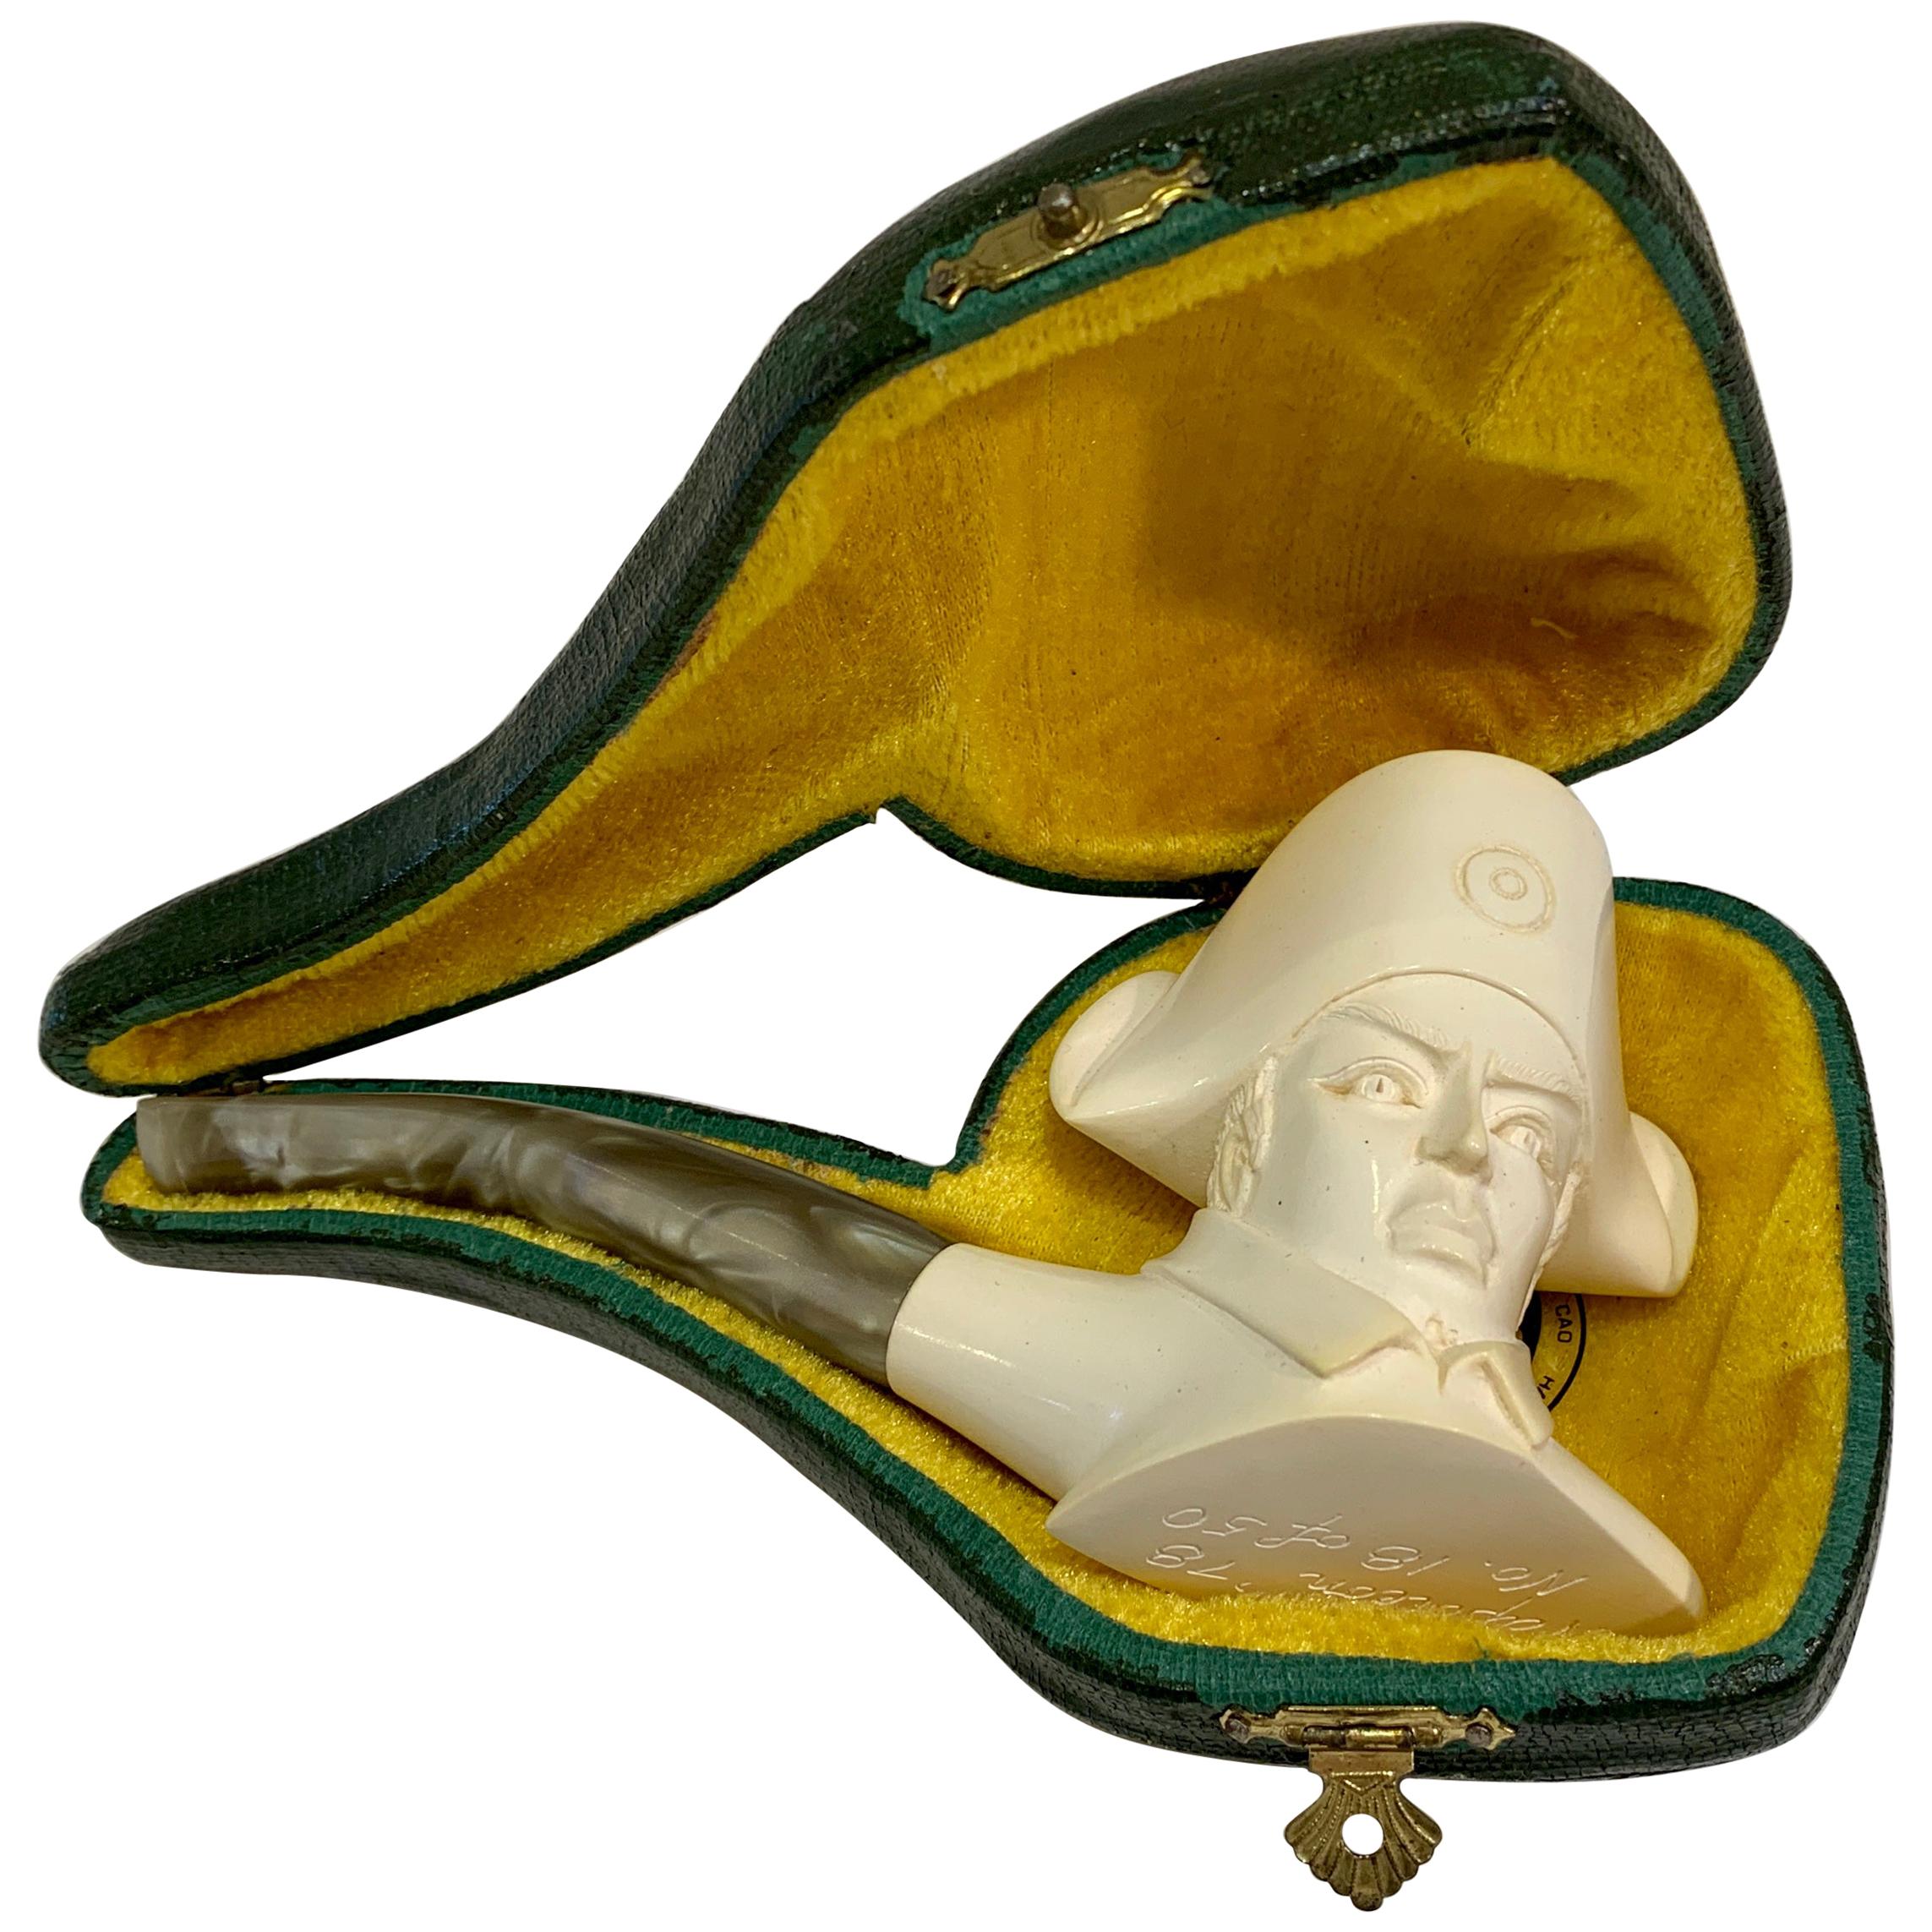  Unique Ismet Bekler CAO Napoleon Meerschaum Pipe Hand Carved Limited Edition For Sale